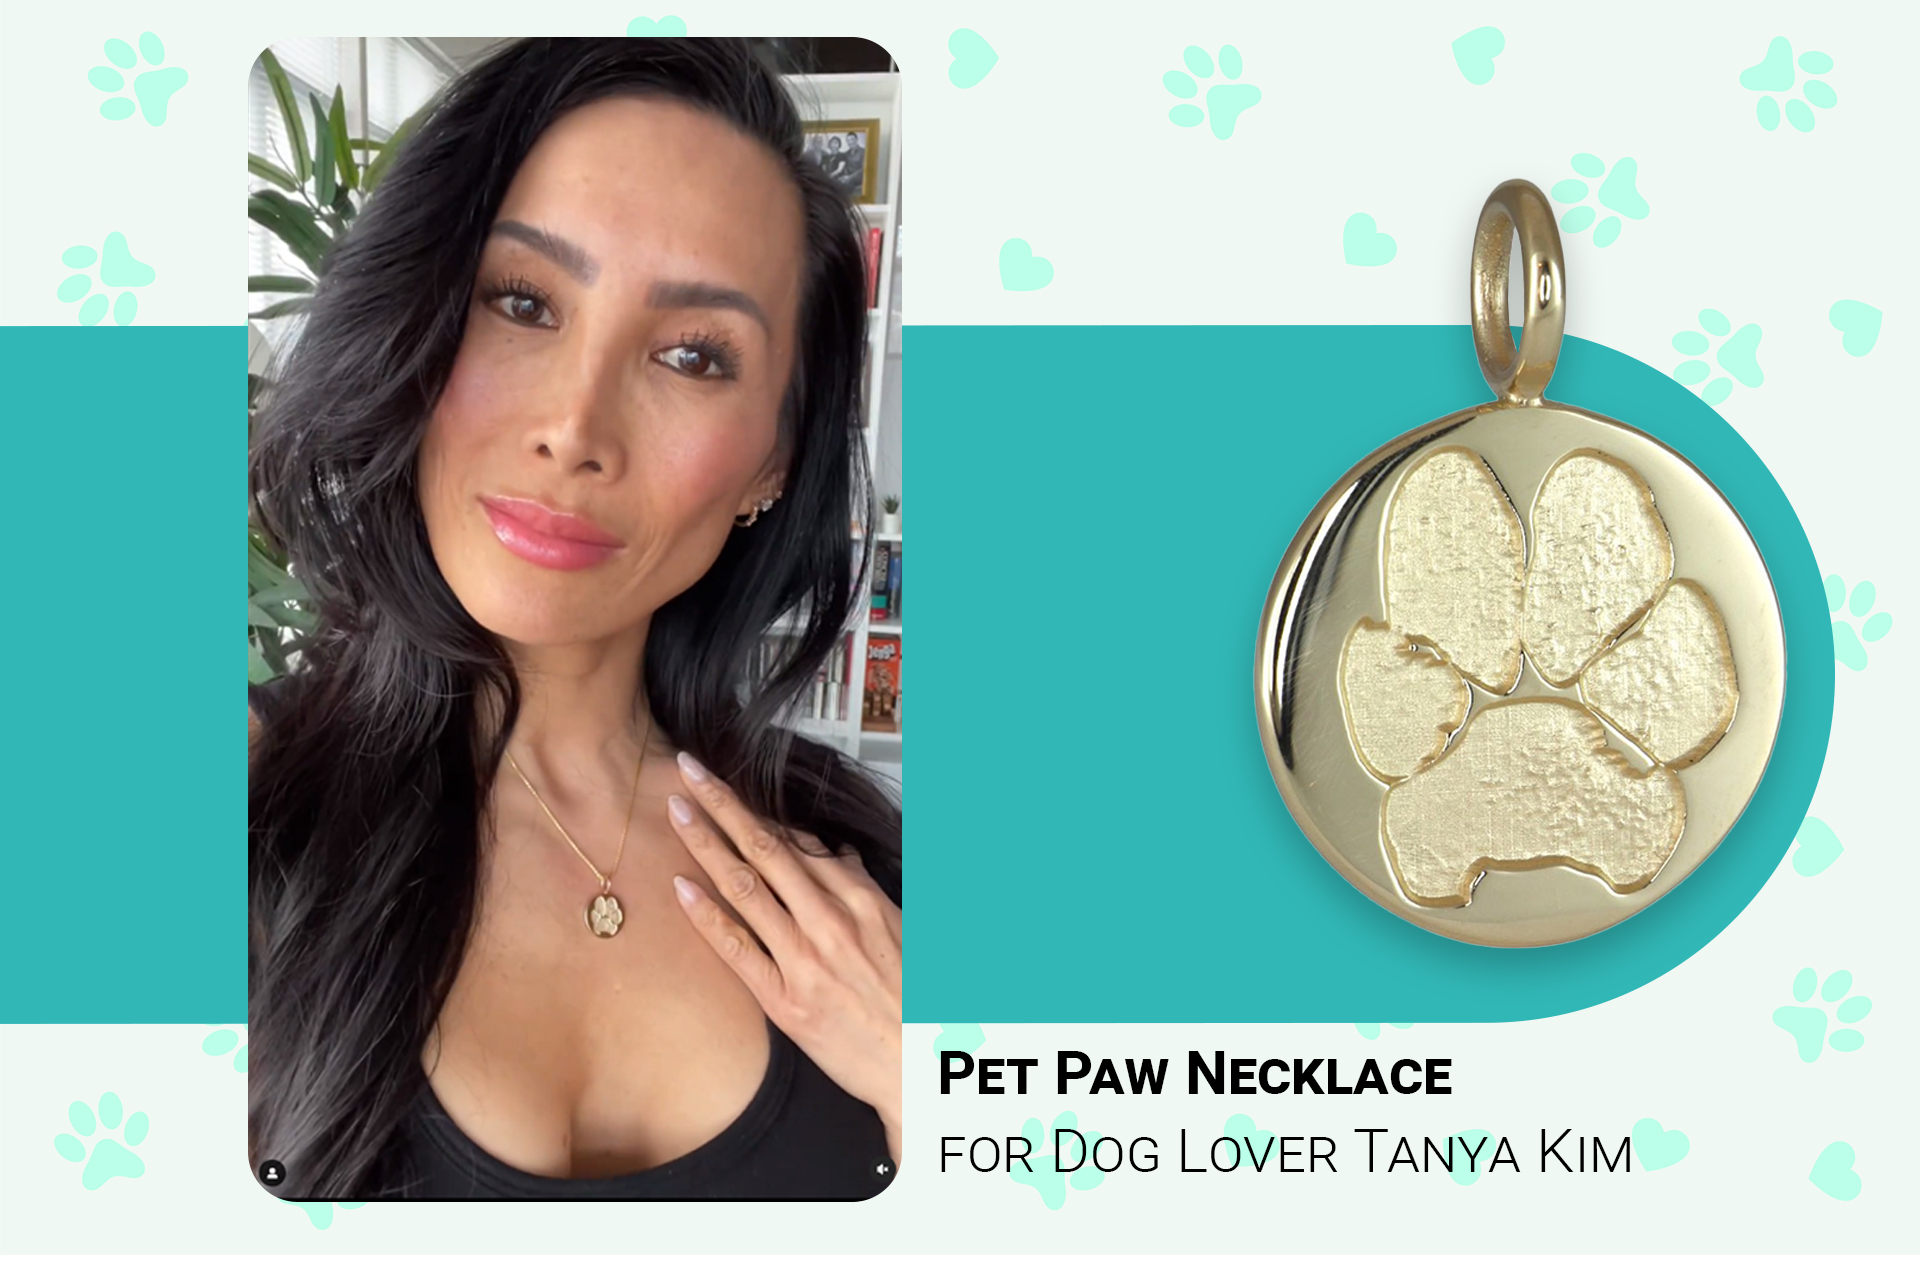 Pet Paw Necklace for Dog Lover Tanya Kim